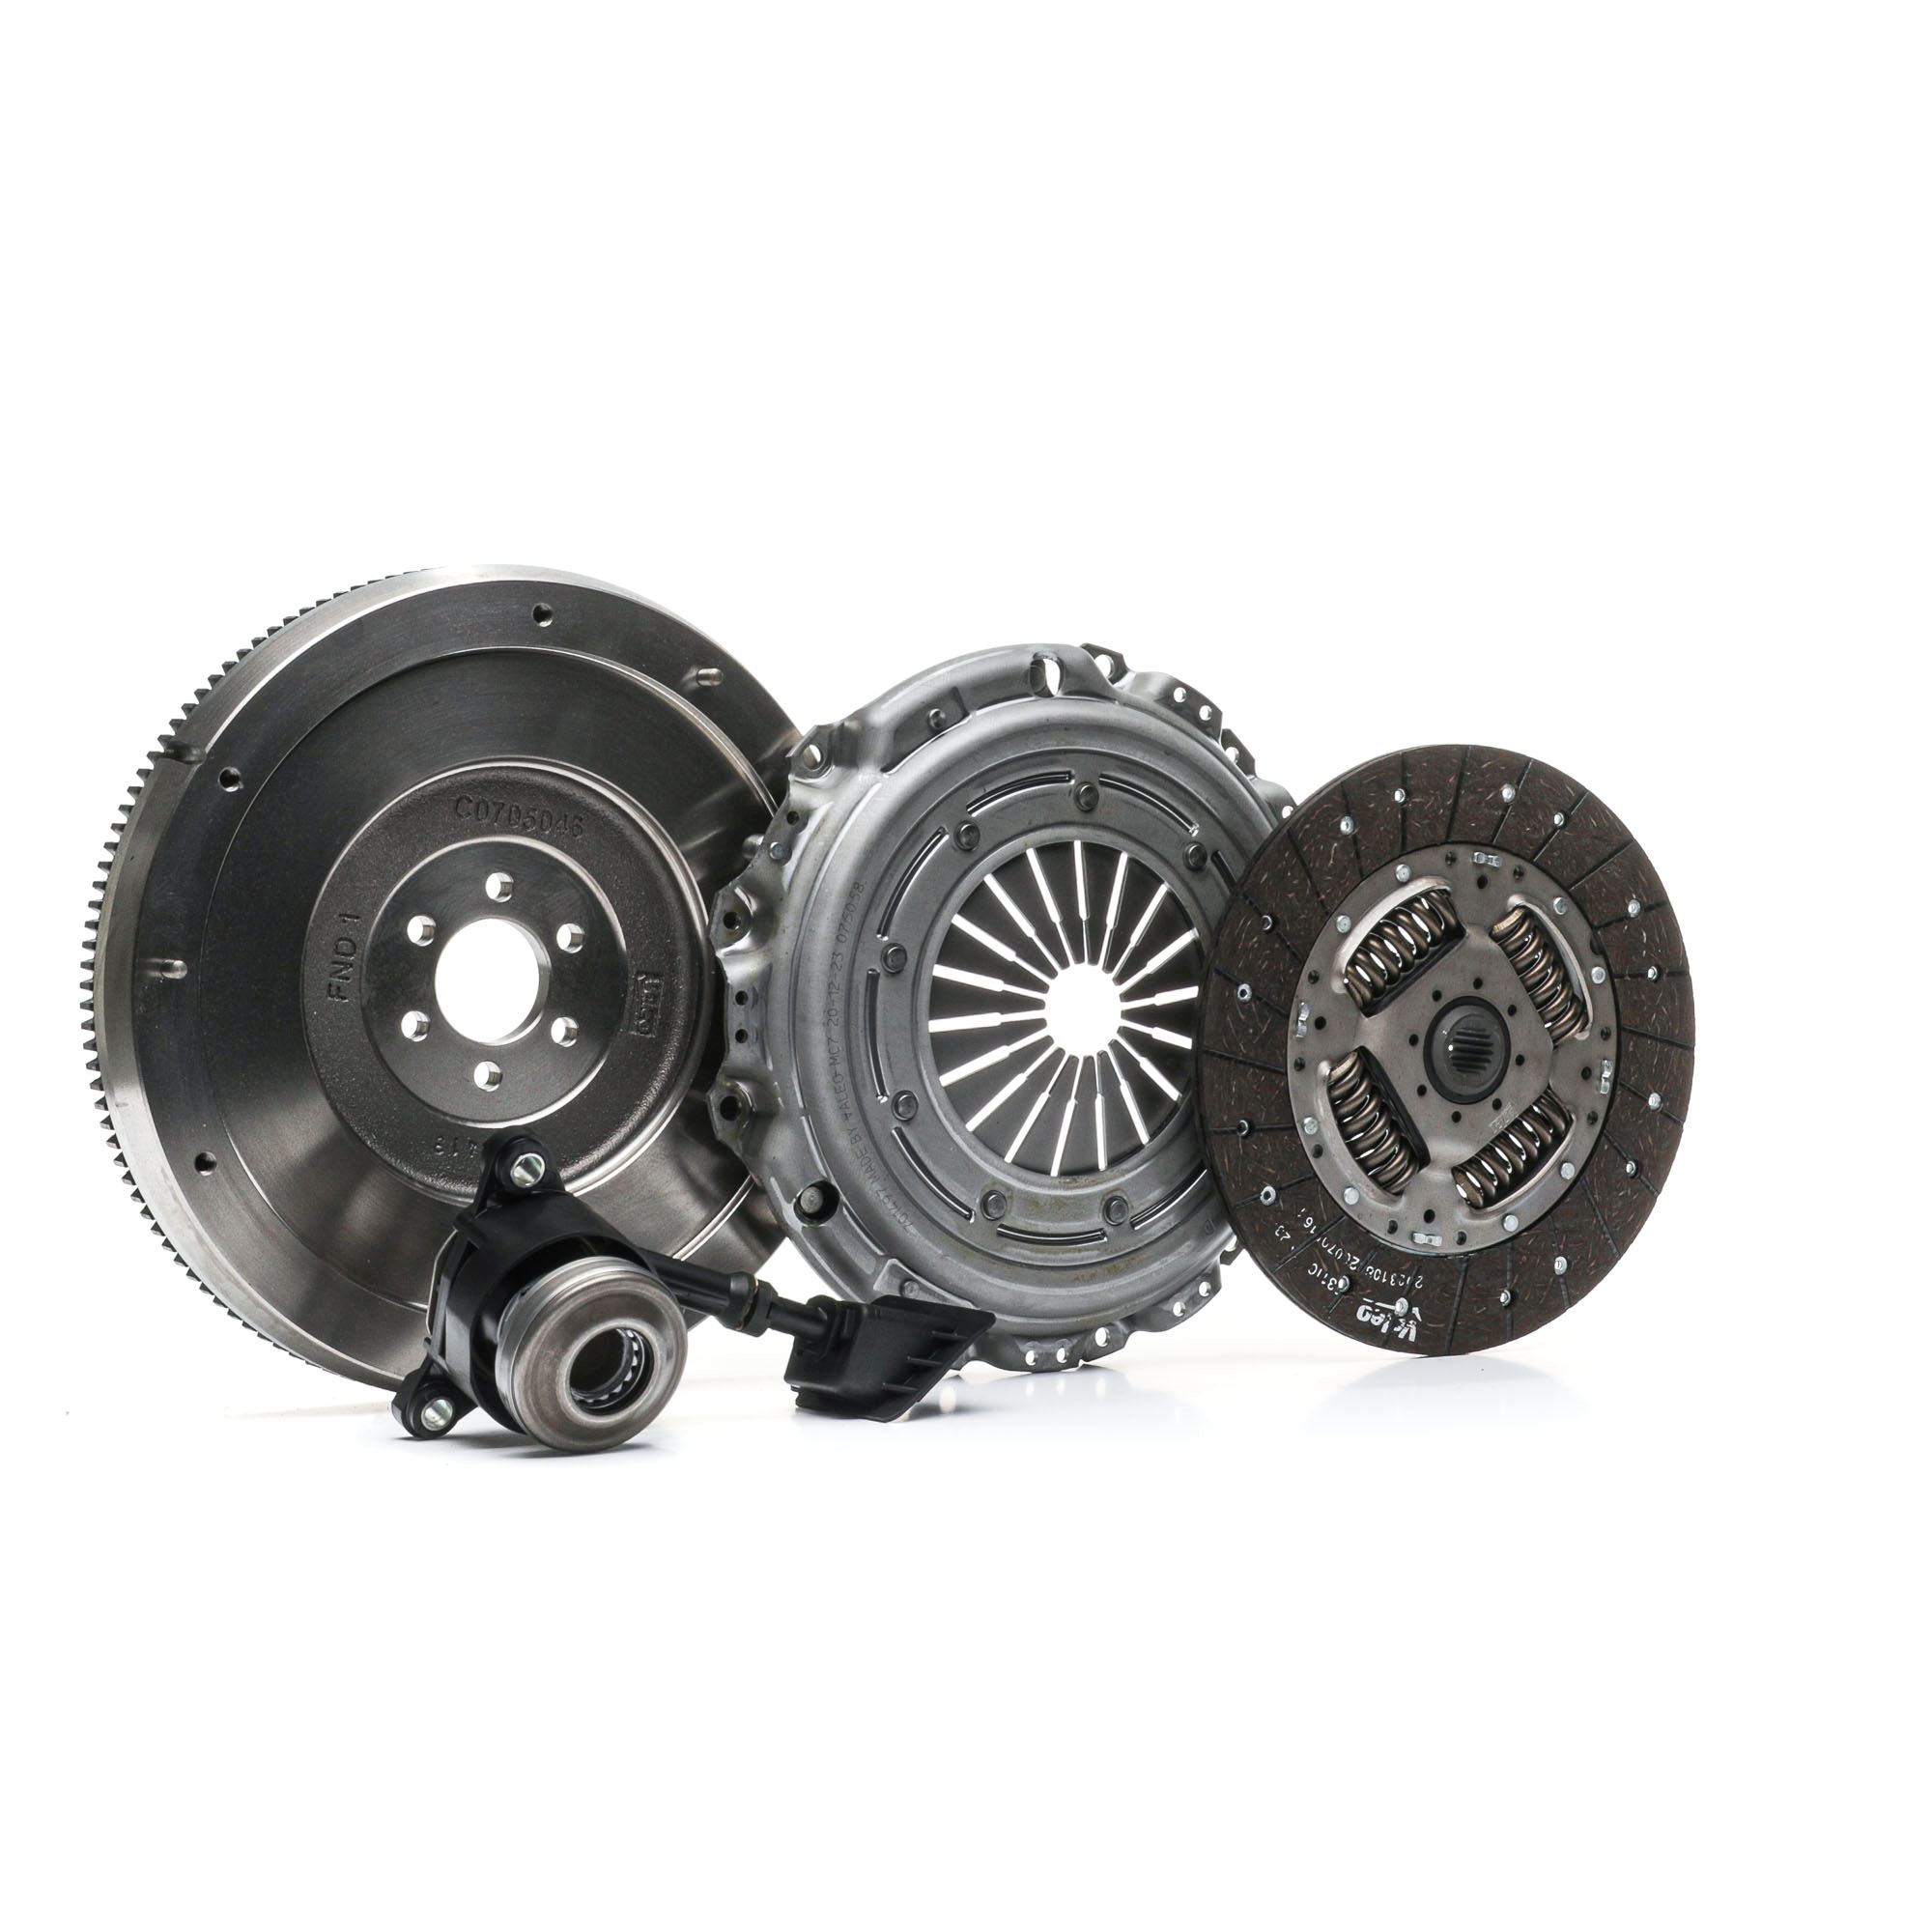 VALEO KIT4P - CONVERSION KIT (CSC) 845181 Clutch kit with single-mass flywheel, with central slave cylinder, 228mm